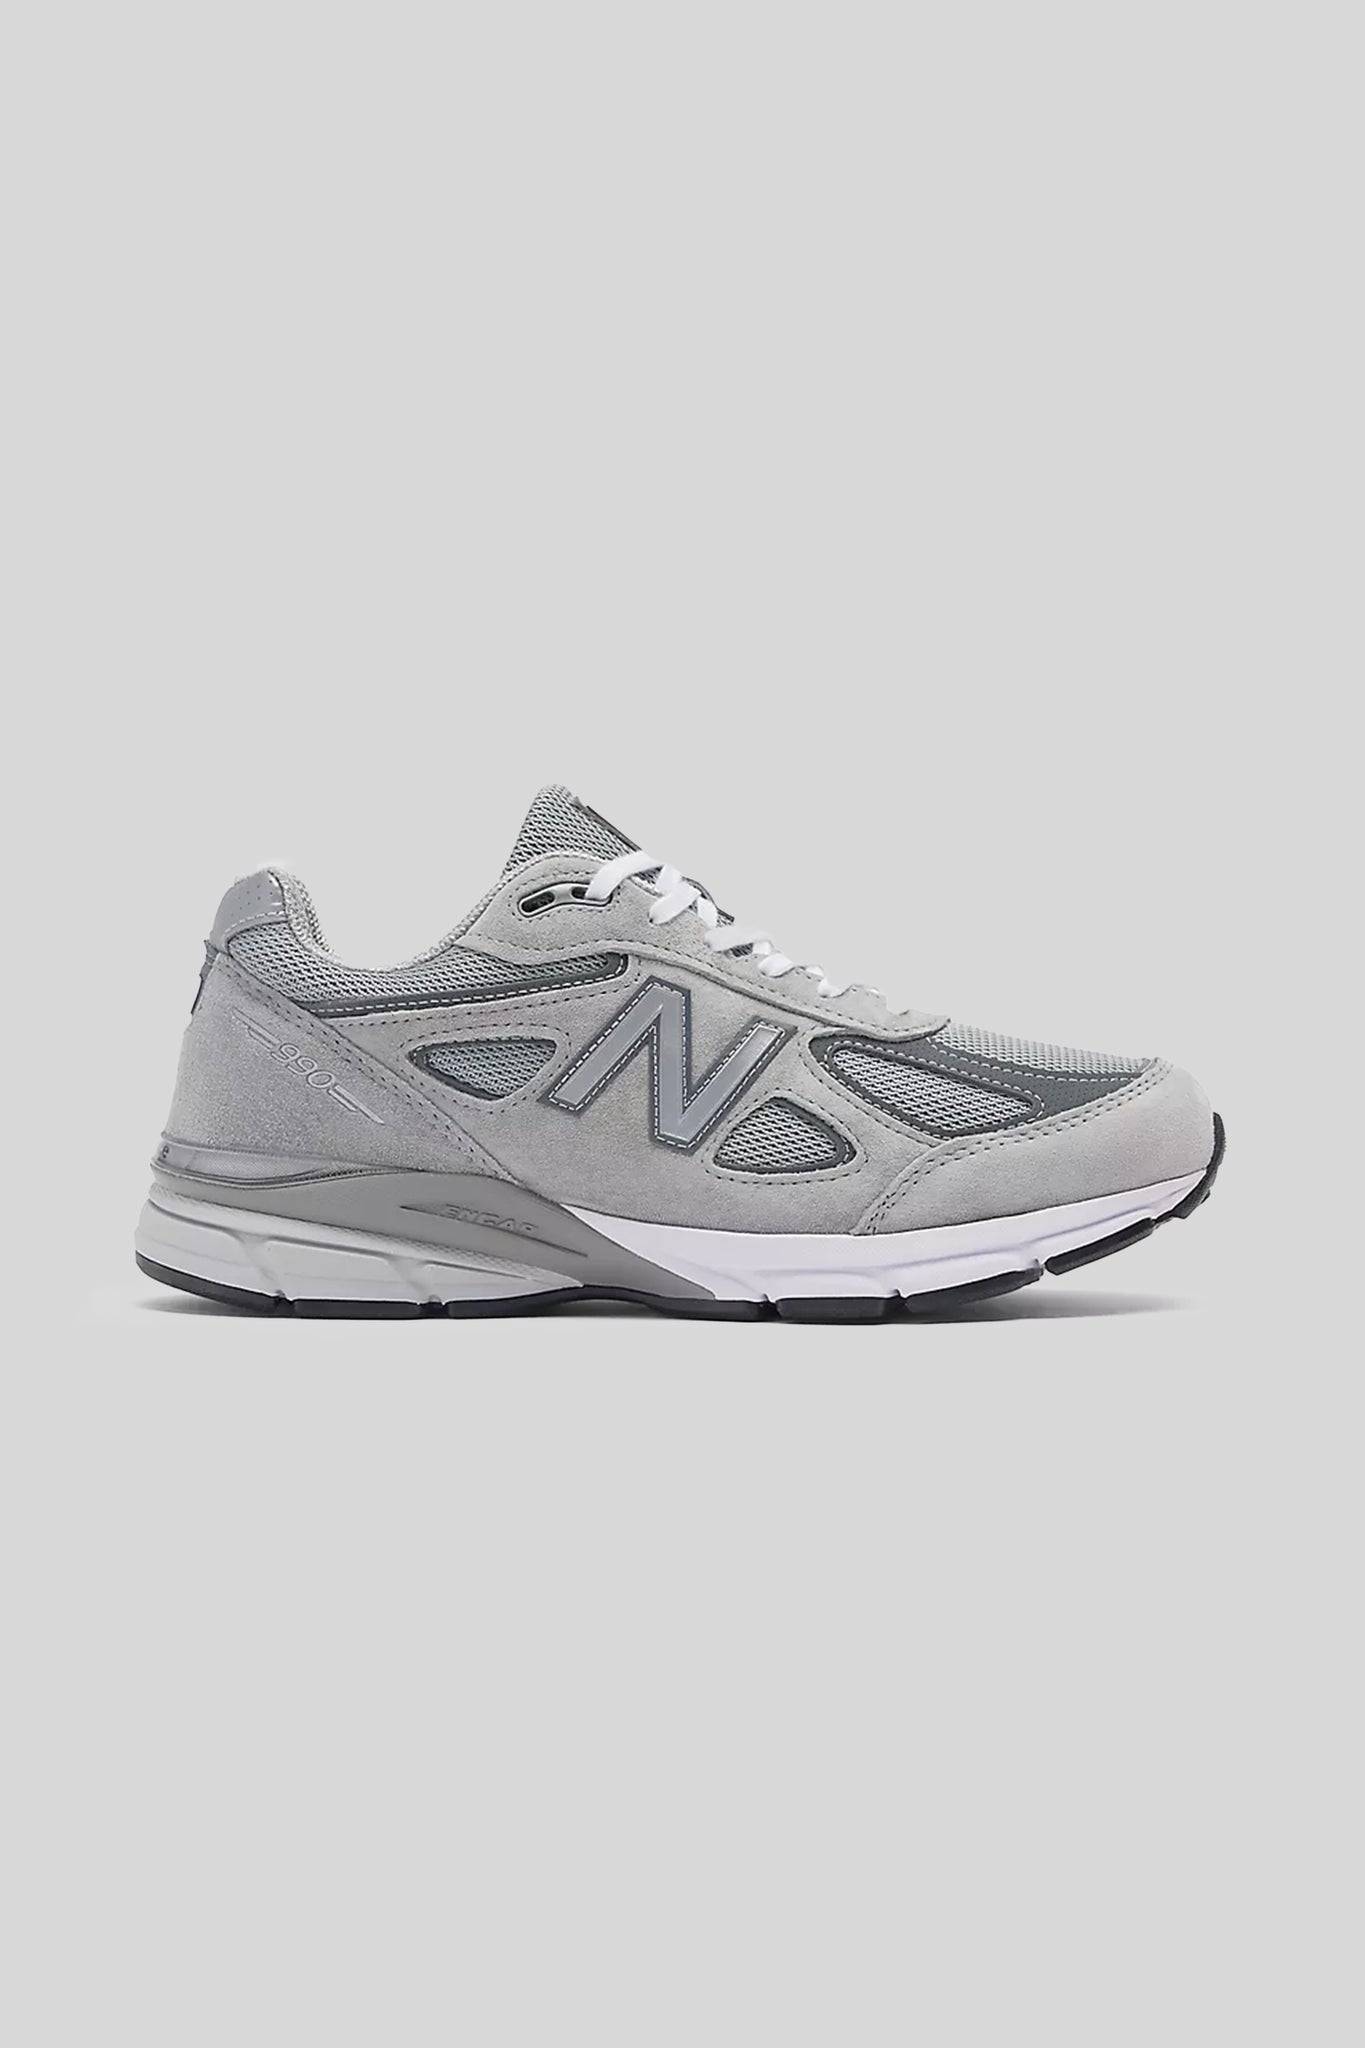 New Balance Men's Made in USA 990v4 Core Sneaker in Grey with Silver